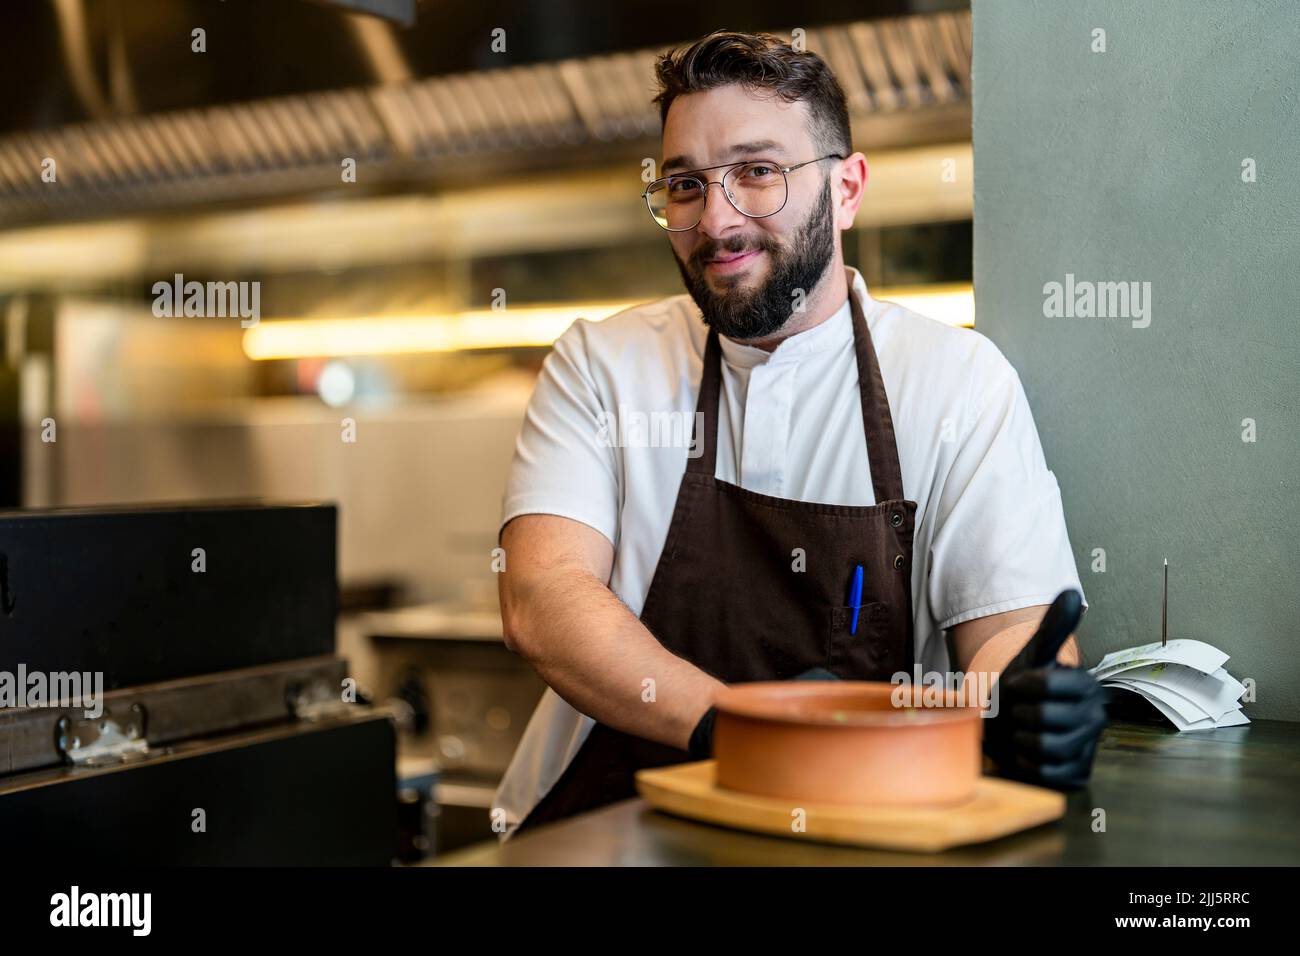 Smiling chef leaning on counter standing at restaurant Stock Photo